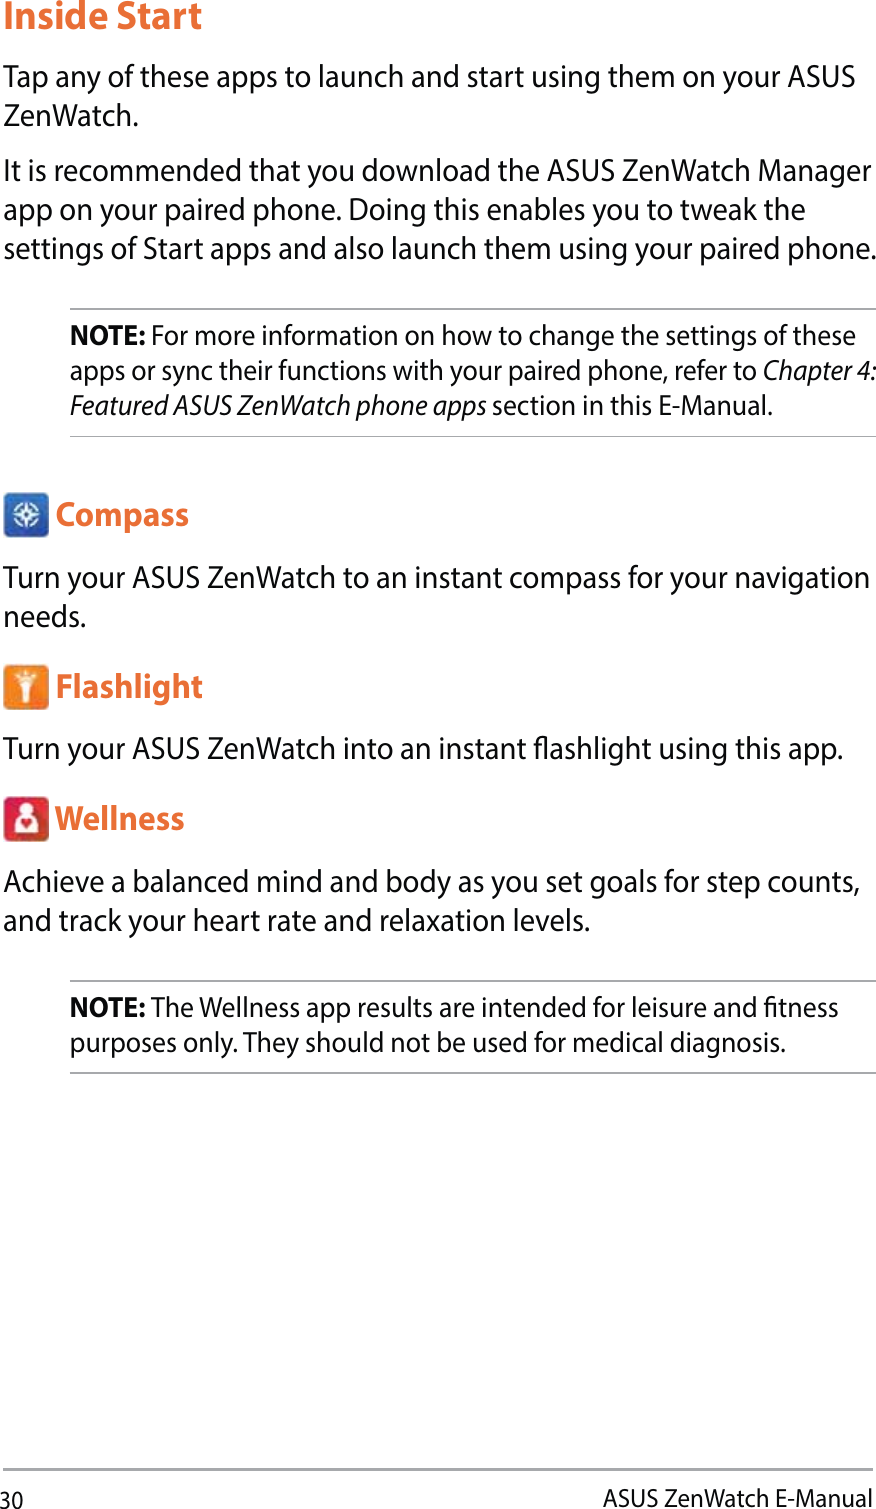 30ASUS ZenWatch E-Manual CompassTurn your ASUS ZenWatch to an instant compass for your navigation needs. FlashlightTurn your ASUS ZenWatch into an instant ashlight using this app.  WellnessAchieve a balanced mind and body as you set goals for step counts, and track your heart rate and relaxation levels.NOTE: The Wellness app results are intended for leisure and tness purposes only. They should not be used for medical diagnosis. Inside Start Tap any of these apps to launch and start using them on your ASUS ZenWatch. It is recommended that you download the ASUS ZenWatch Manager  app on your paired phone. Doing this enables you to tweak the settings of Start apps and also launch them using your paired phone. NOTE: For more information on how to change the settings of these apps or sync their functions with your paired phone, refer to Chapter 4: Featured ASUS ZenWatch phone apps section in this E-Manual.